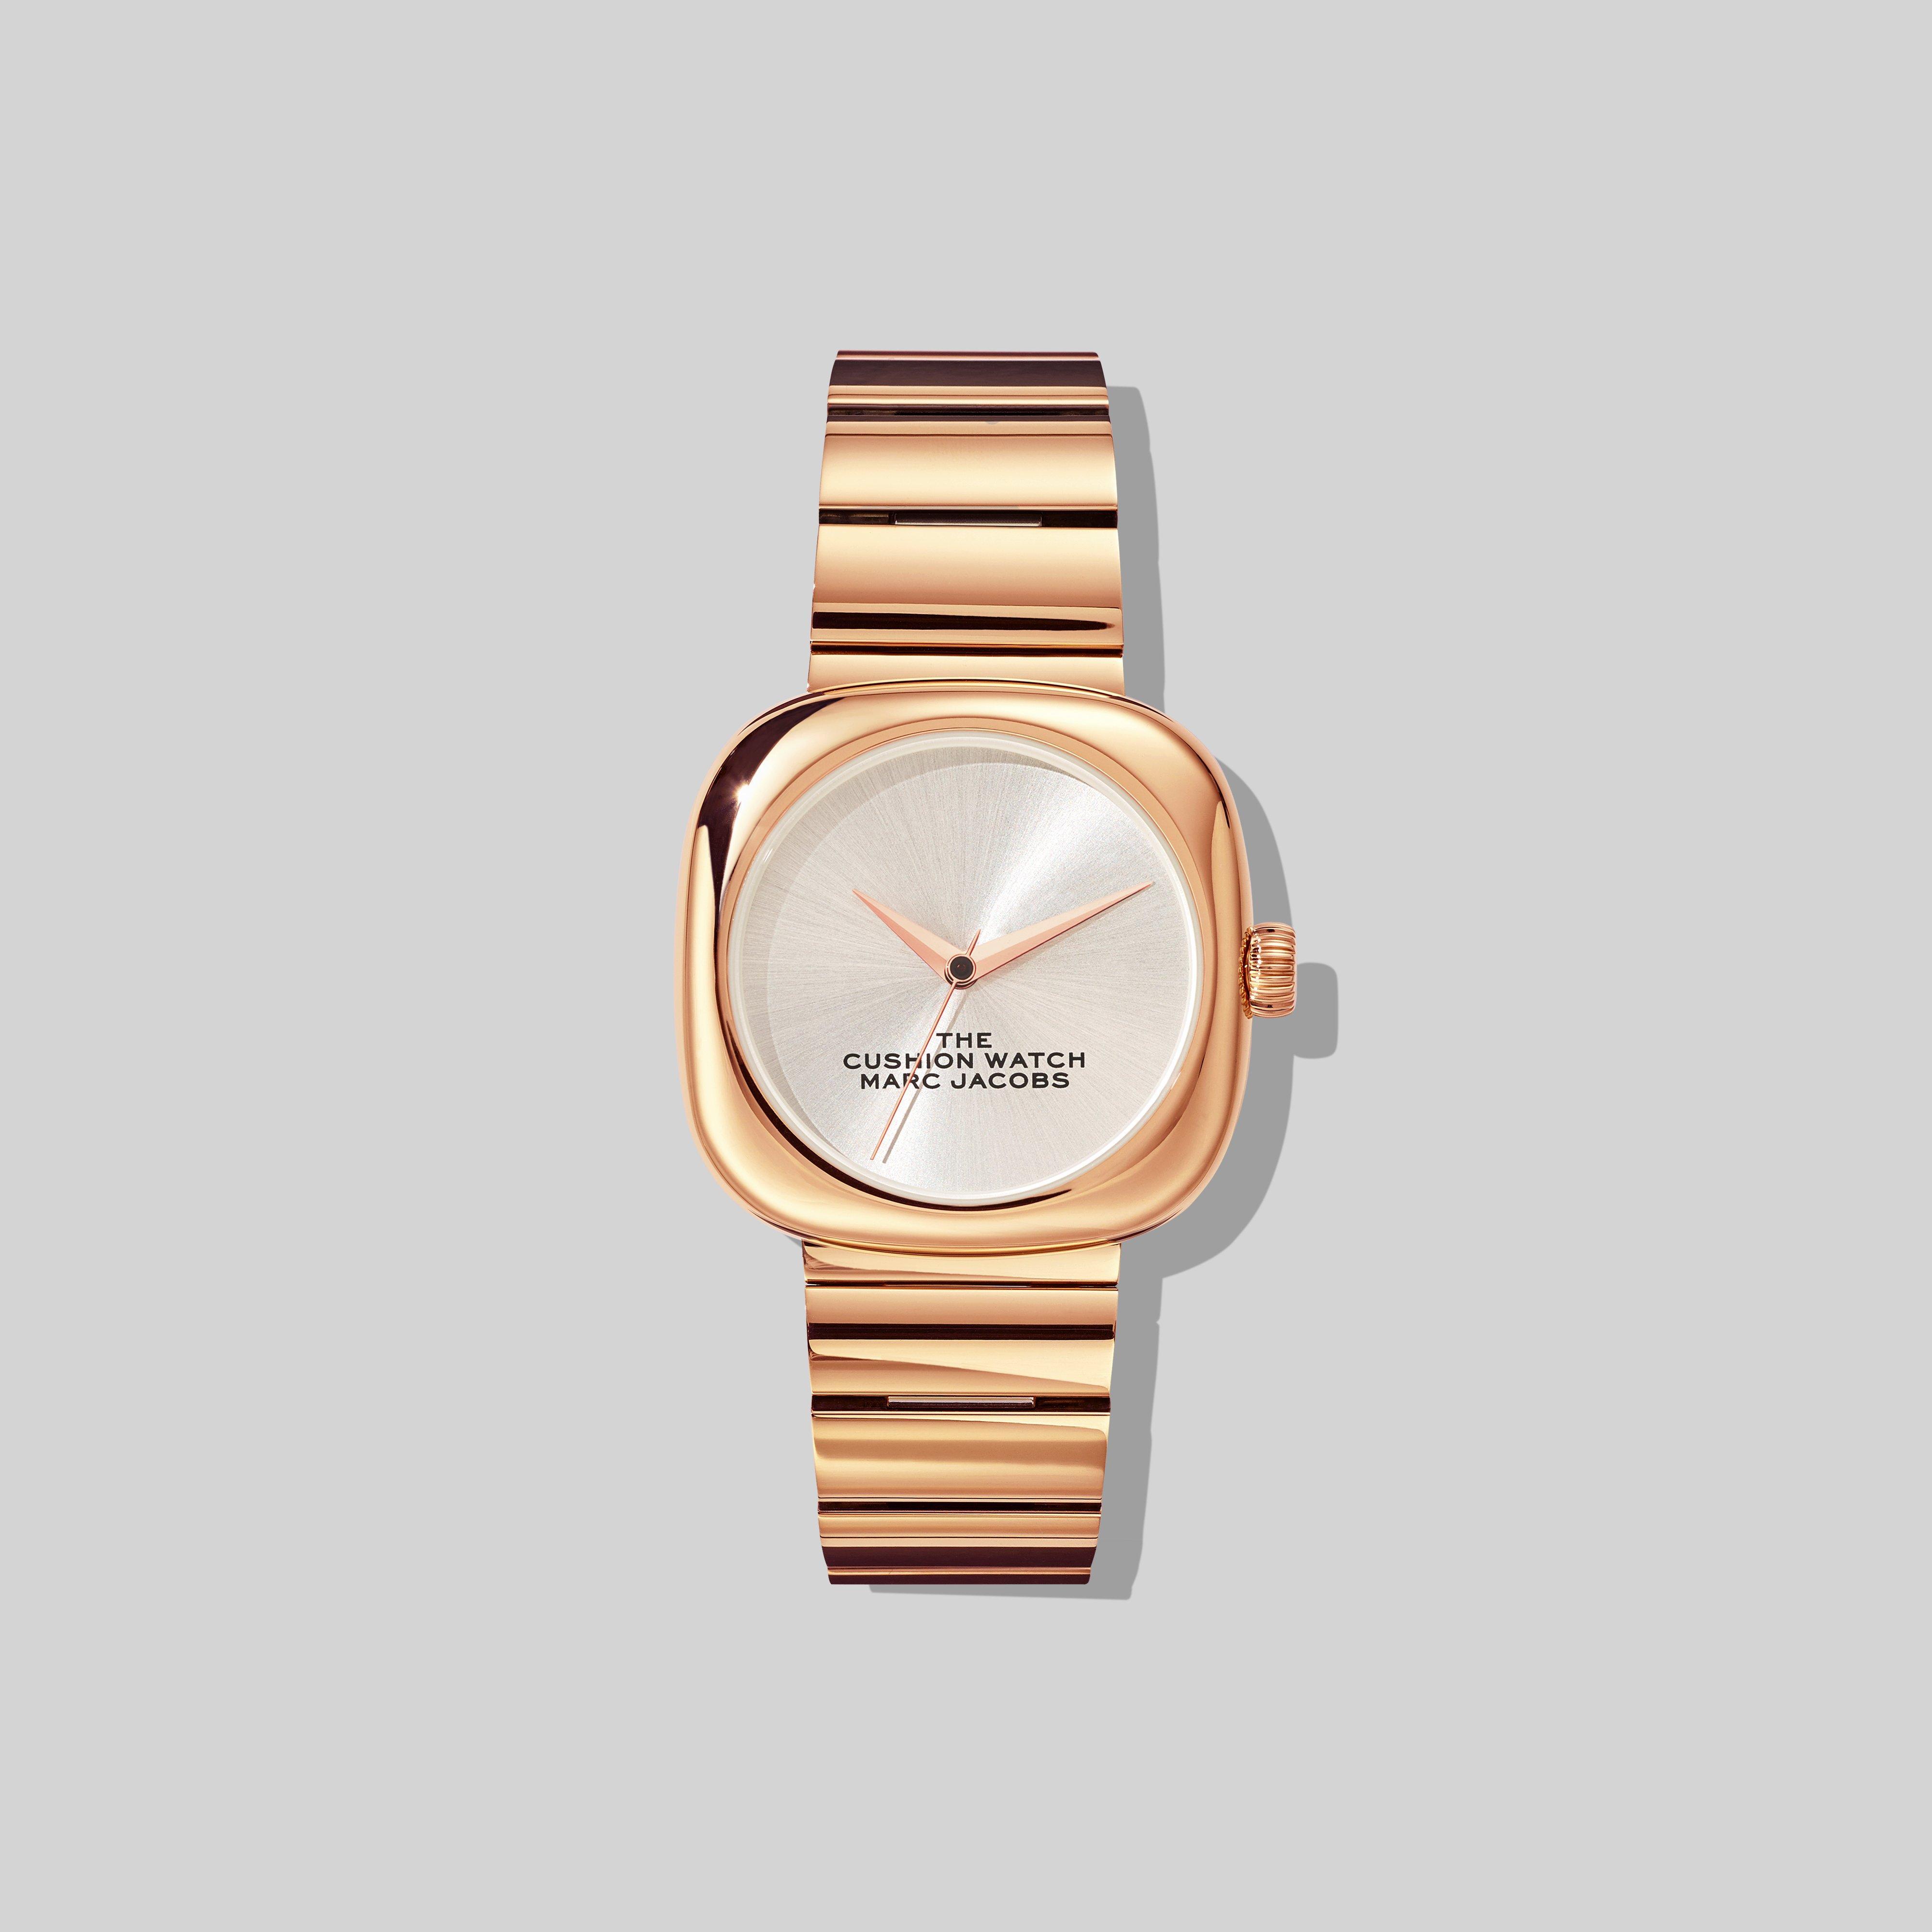 Marc Jacobs The Cushion Watch in White/Rose Gold (Metallic) - Lyst